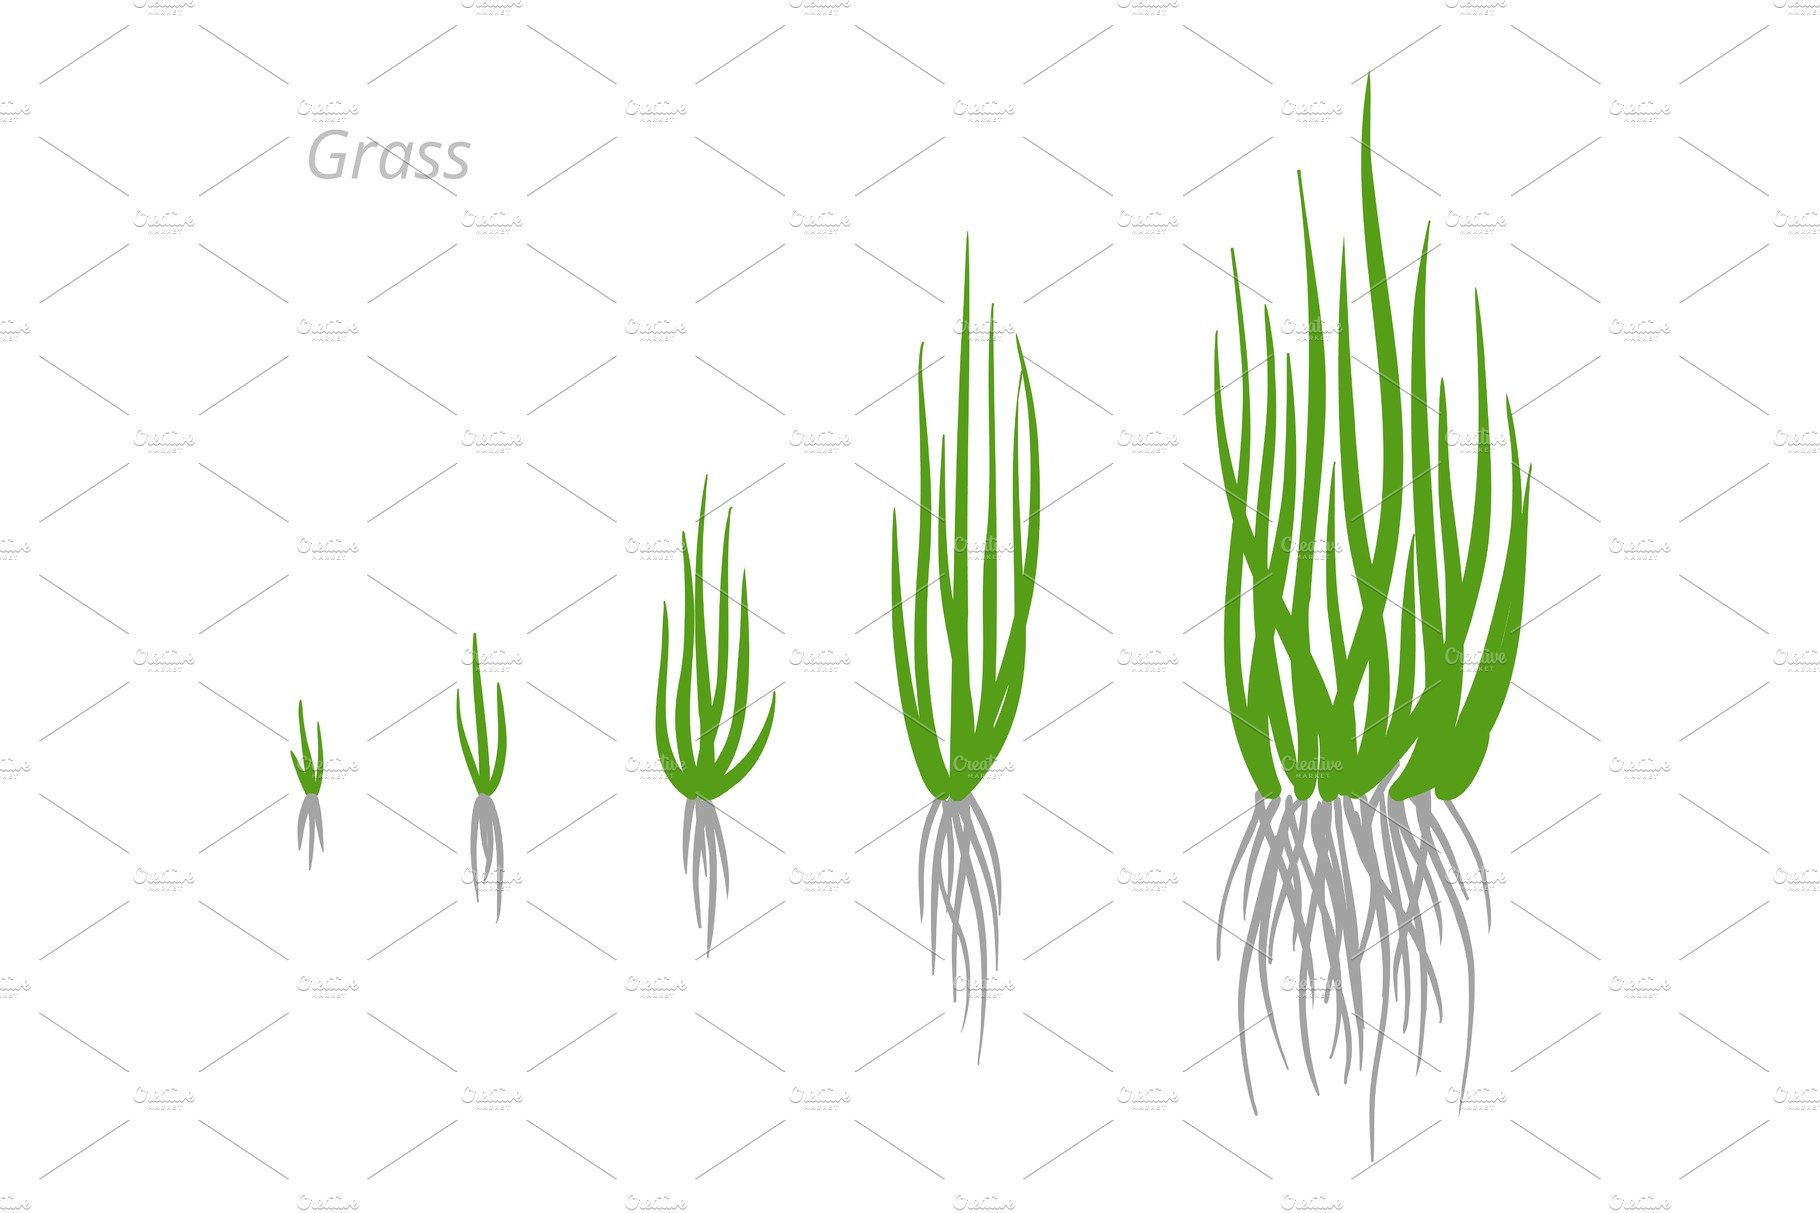 Group of grass growing from the ground to the ground.